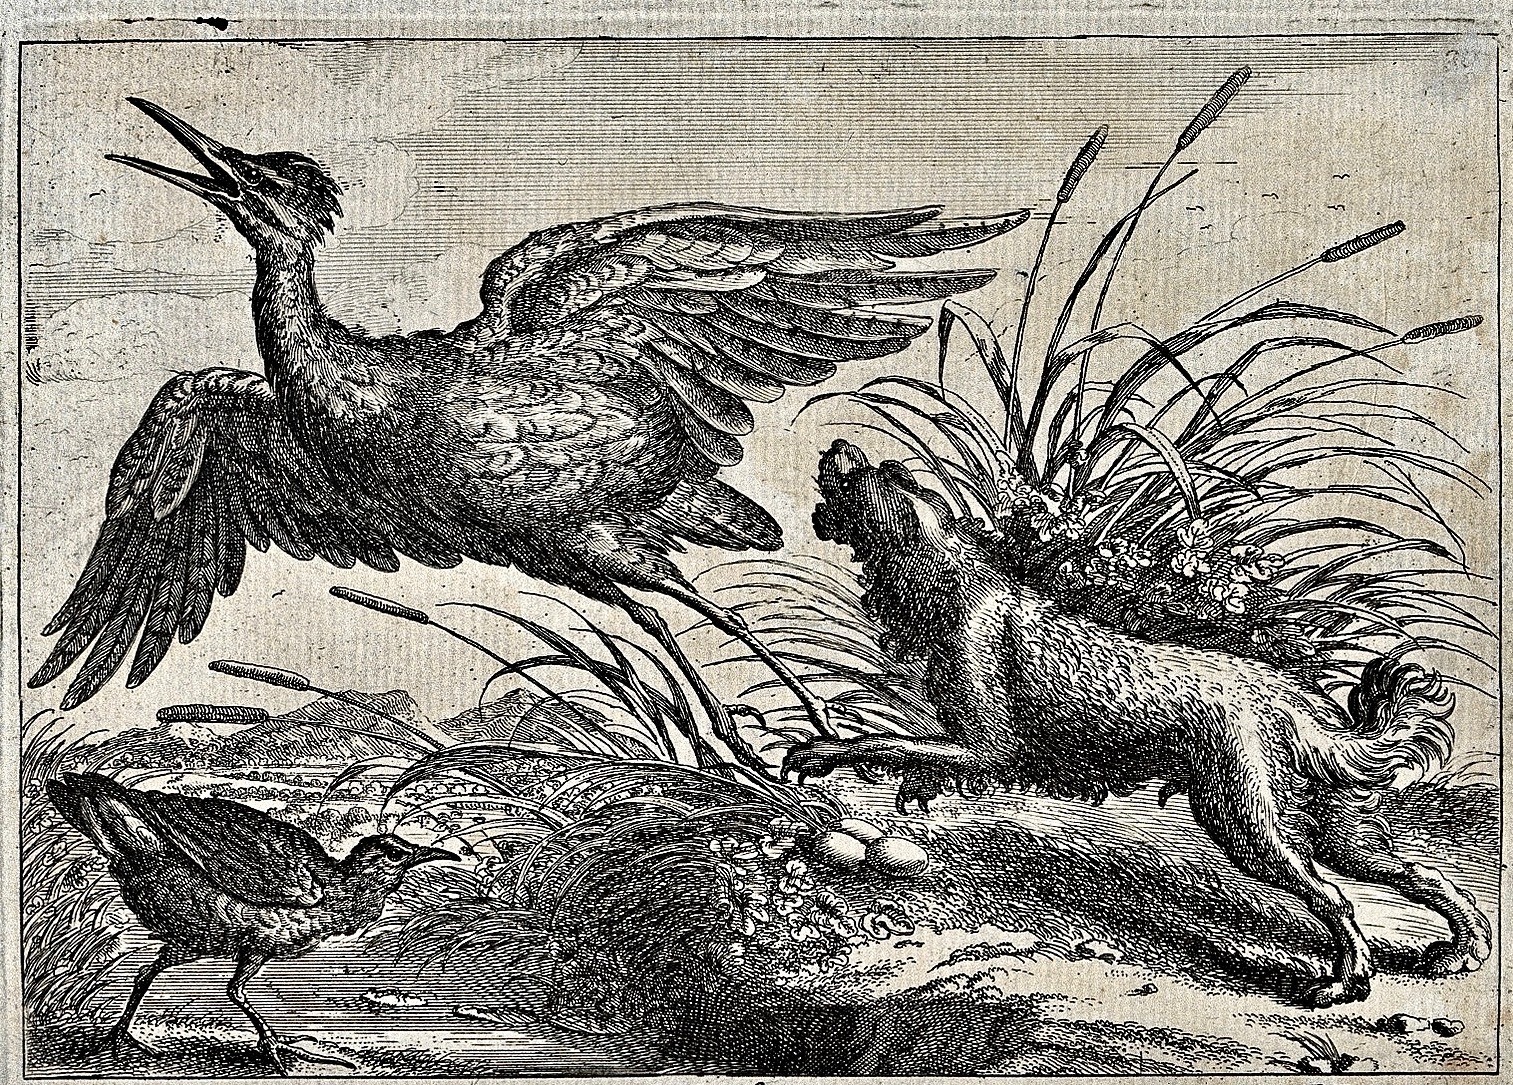 Dogs harassing wildlife has been a known problem for a long time. Here, an etching dated to 1690 showing a domestic dog chasing a heron off its nest at a wetland. Few dog owners who take their pets to lakes, ponds and rivers for swims ever reflect on why they don't see more nesting birds. Image available through Creative Commons license Wellcomecollection.org/works/bzfrmdaf CC-BY-4.0